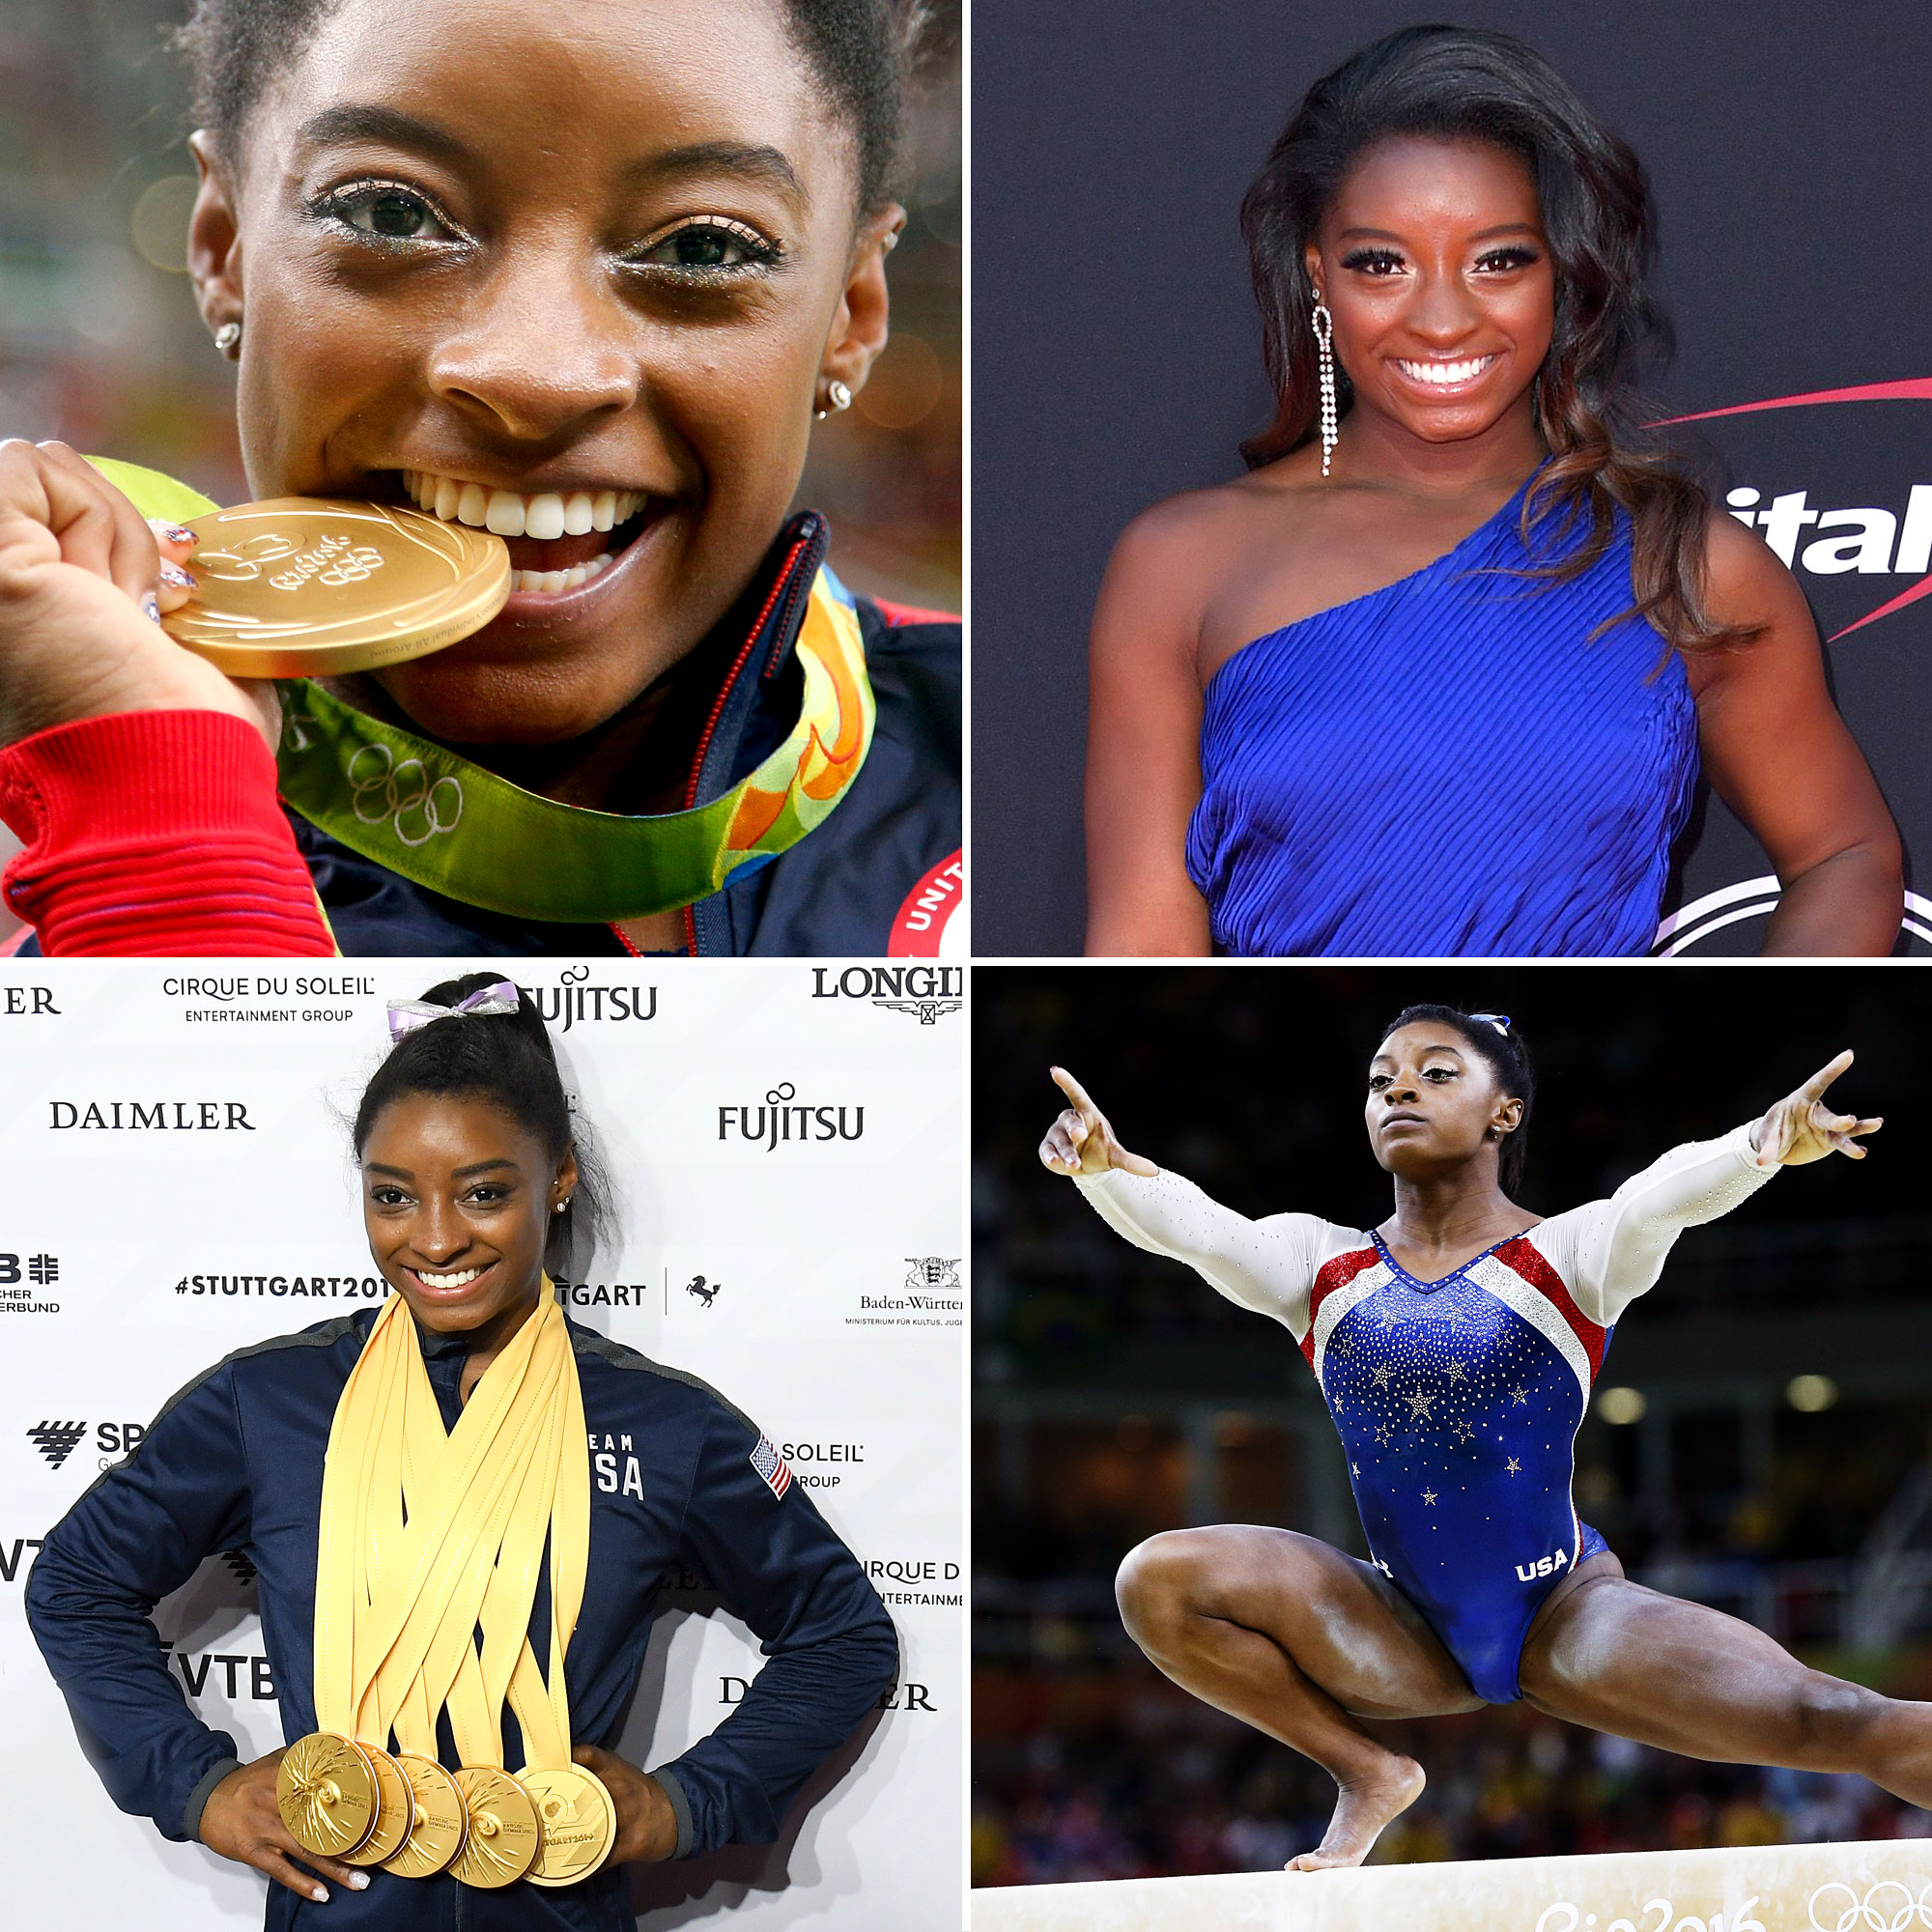 Simone Biles Just Became the Most Decorated Gymnast, Ever